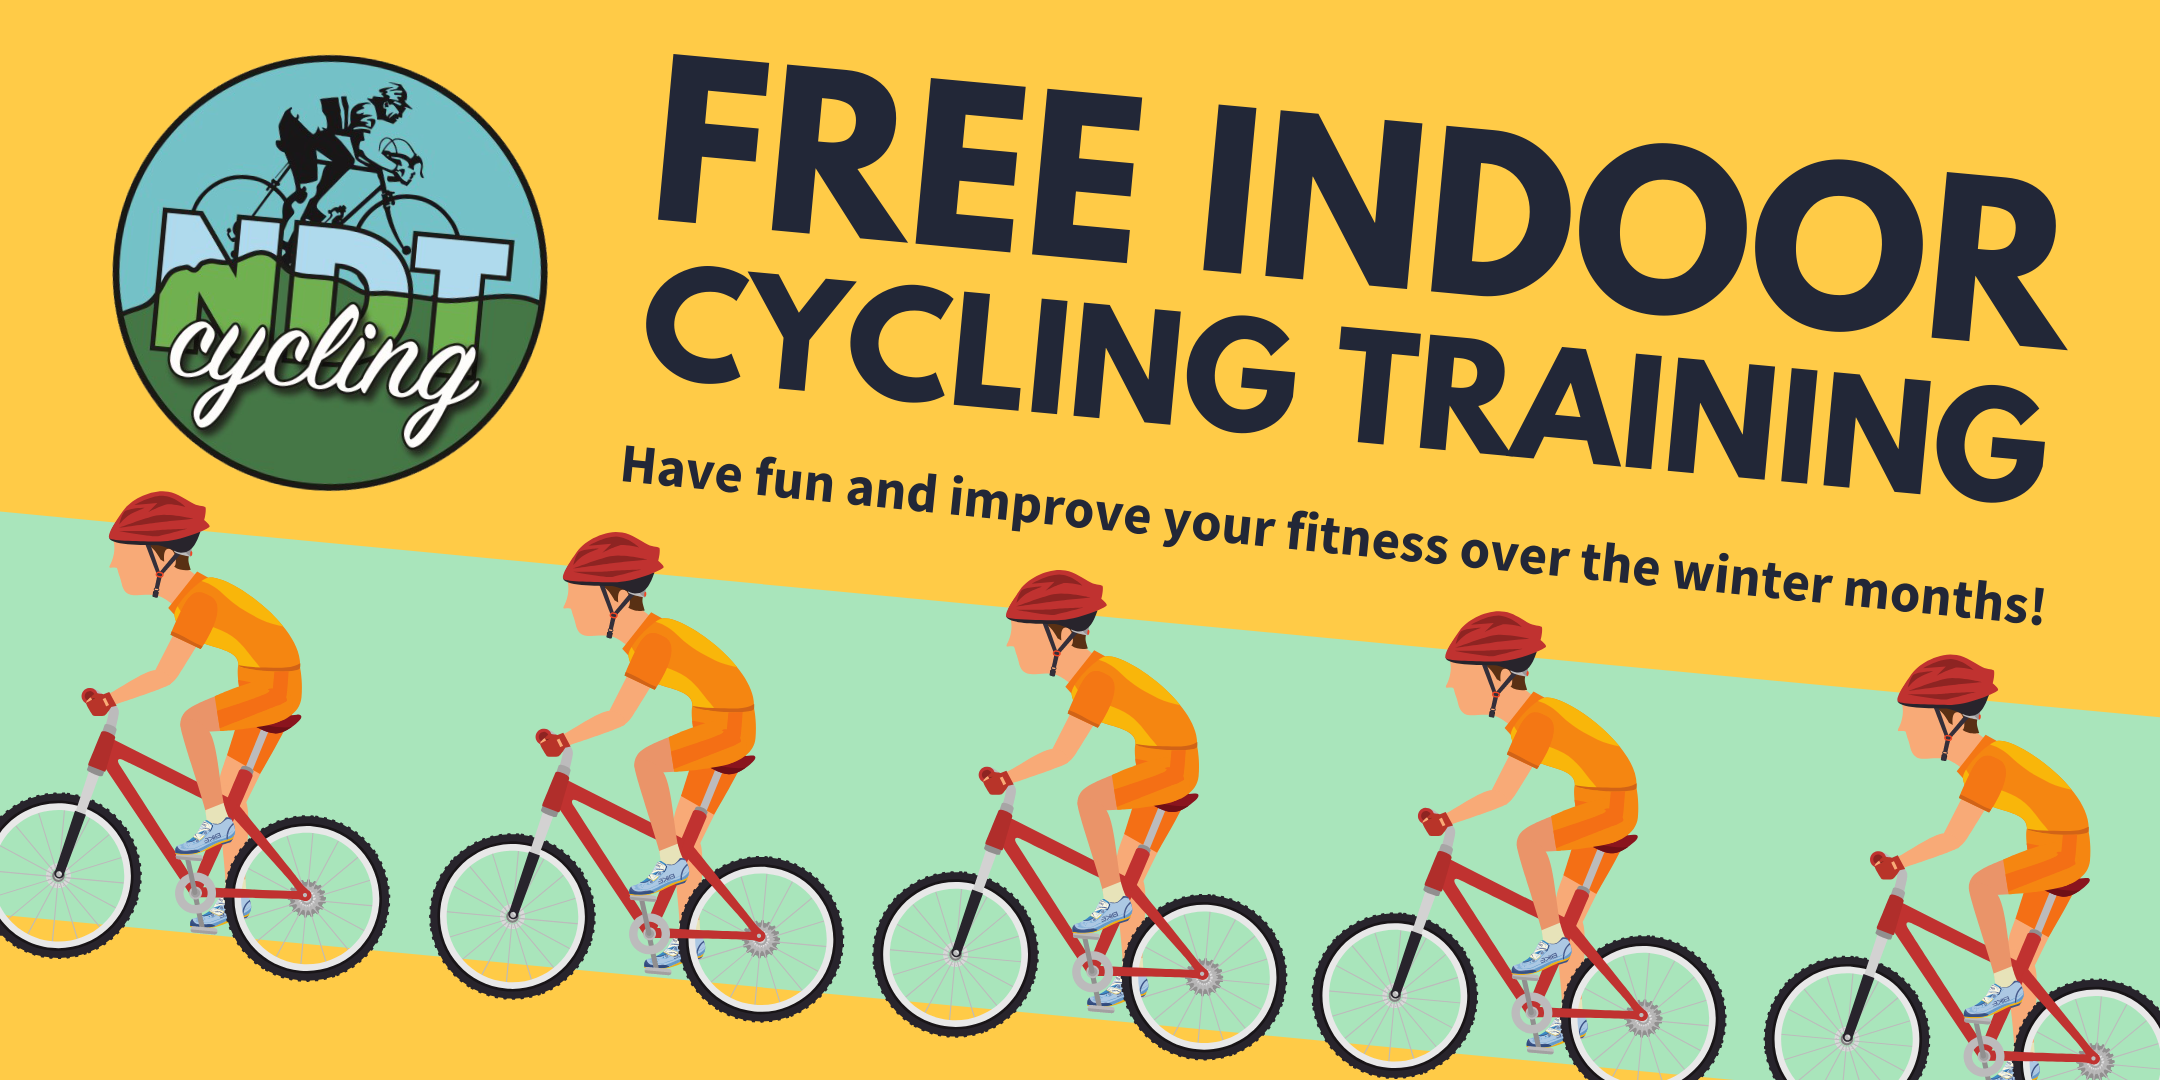 3 x FREE Indoor Winter Cycling Training Sessions (PM, 3 - 17 March)